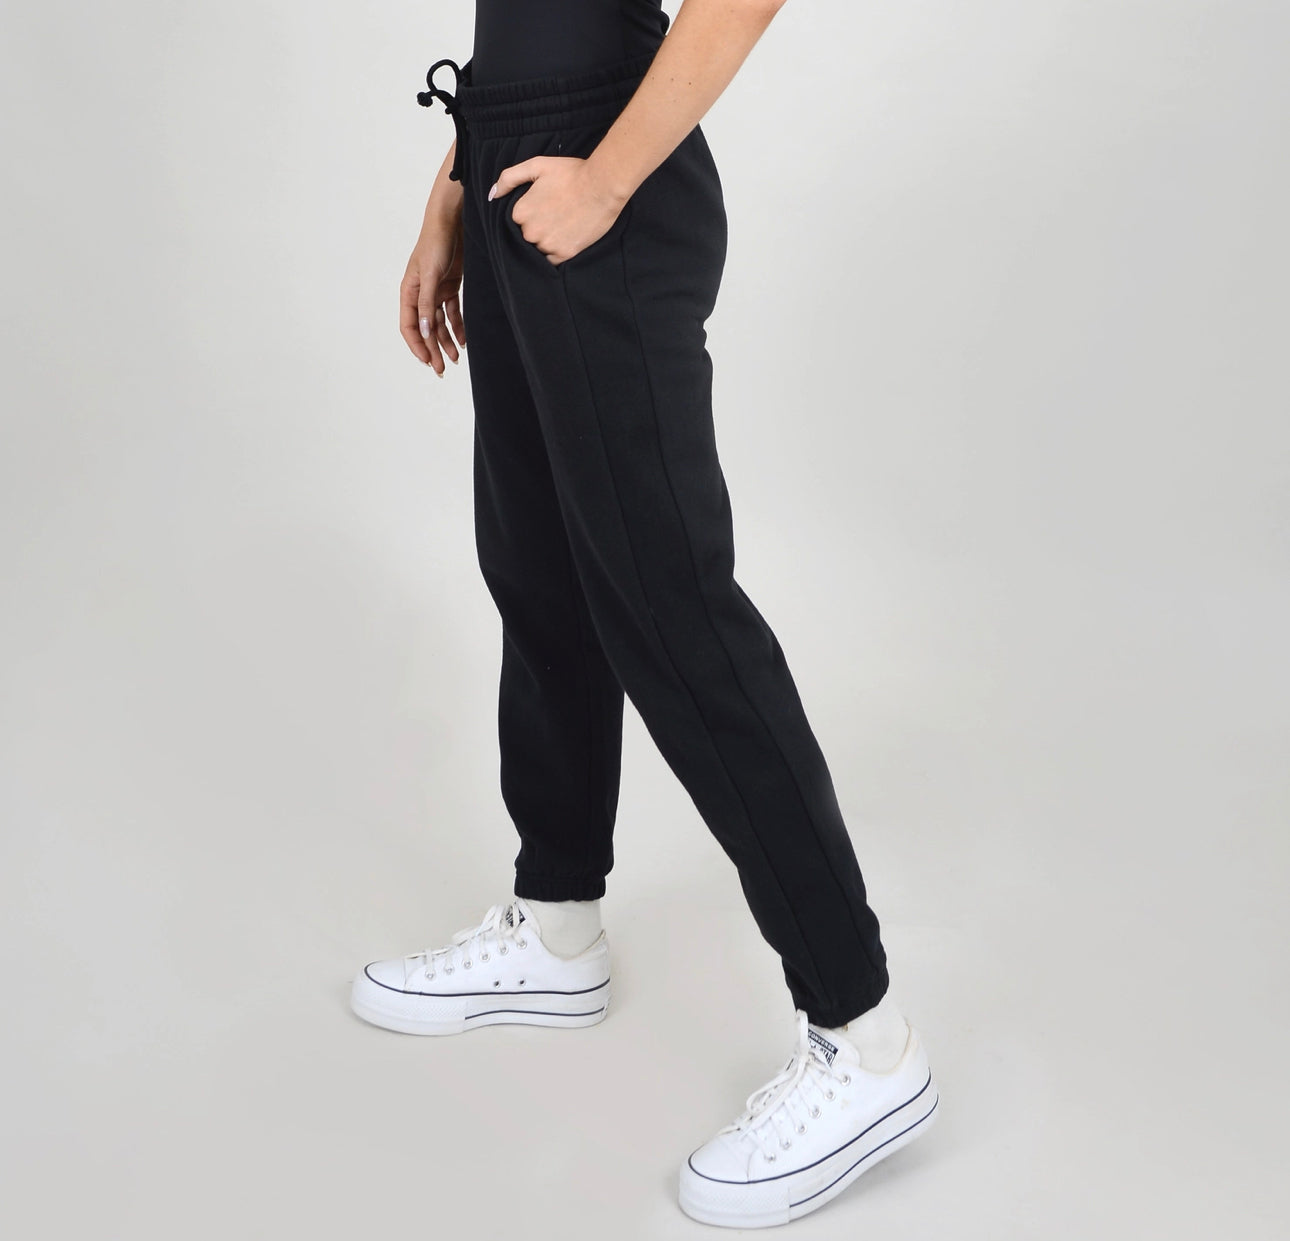 RD Style Pattie Joggers